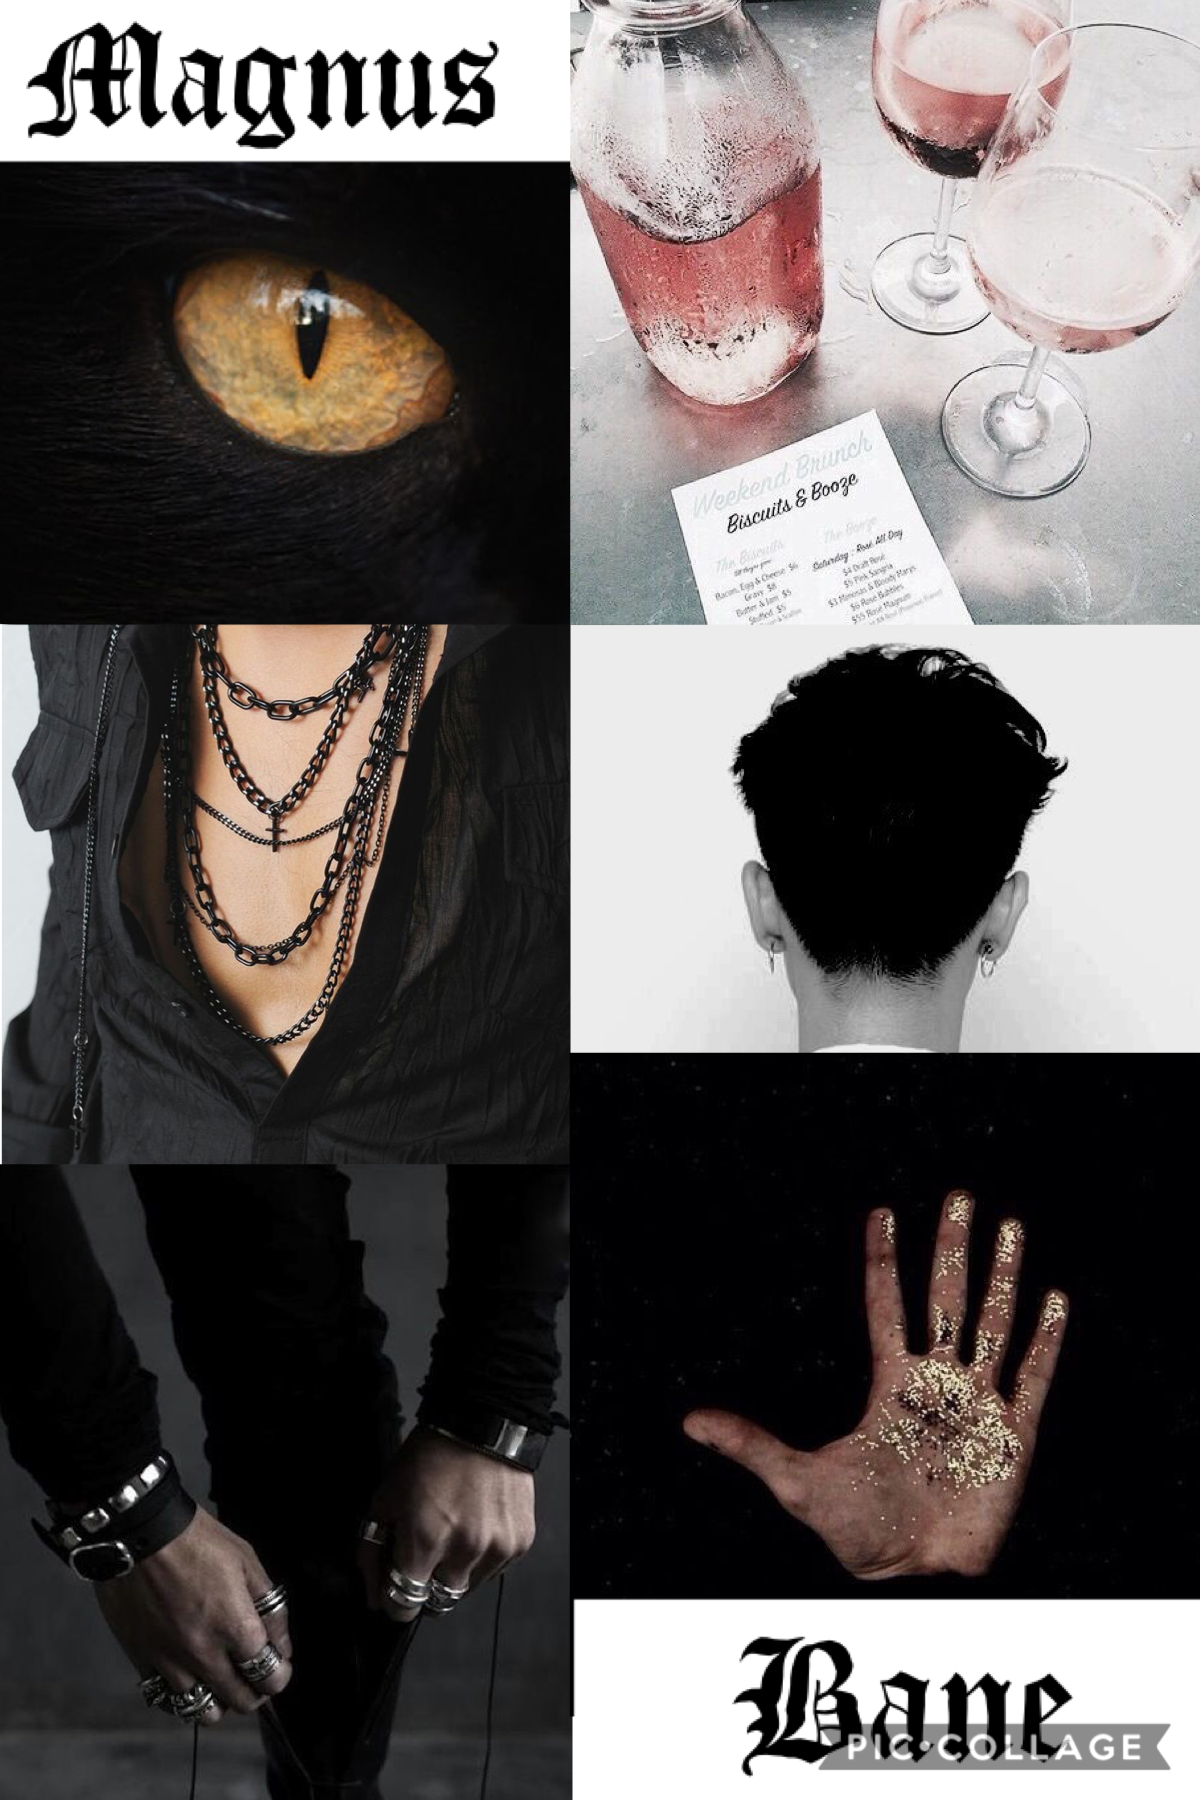 Starting off with my favourite character. On this acc I will be posting the aesthetics of characters from Cassandra Clare’s Shadowhunter Chronicles books hope you like 😊